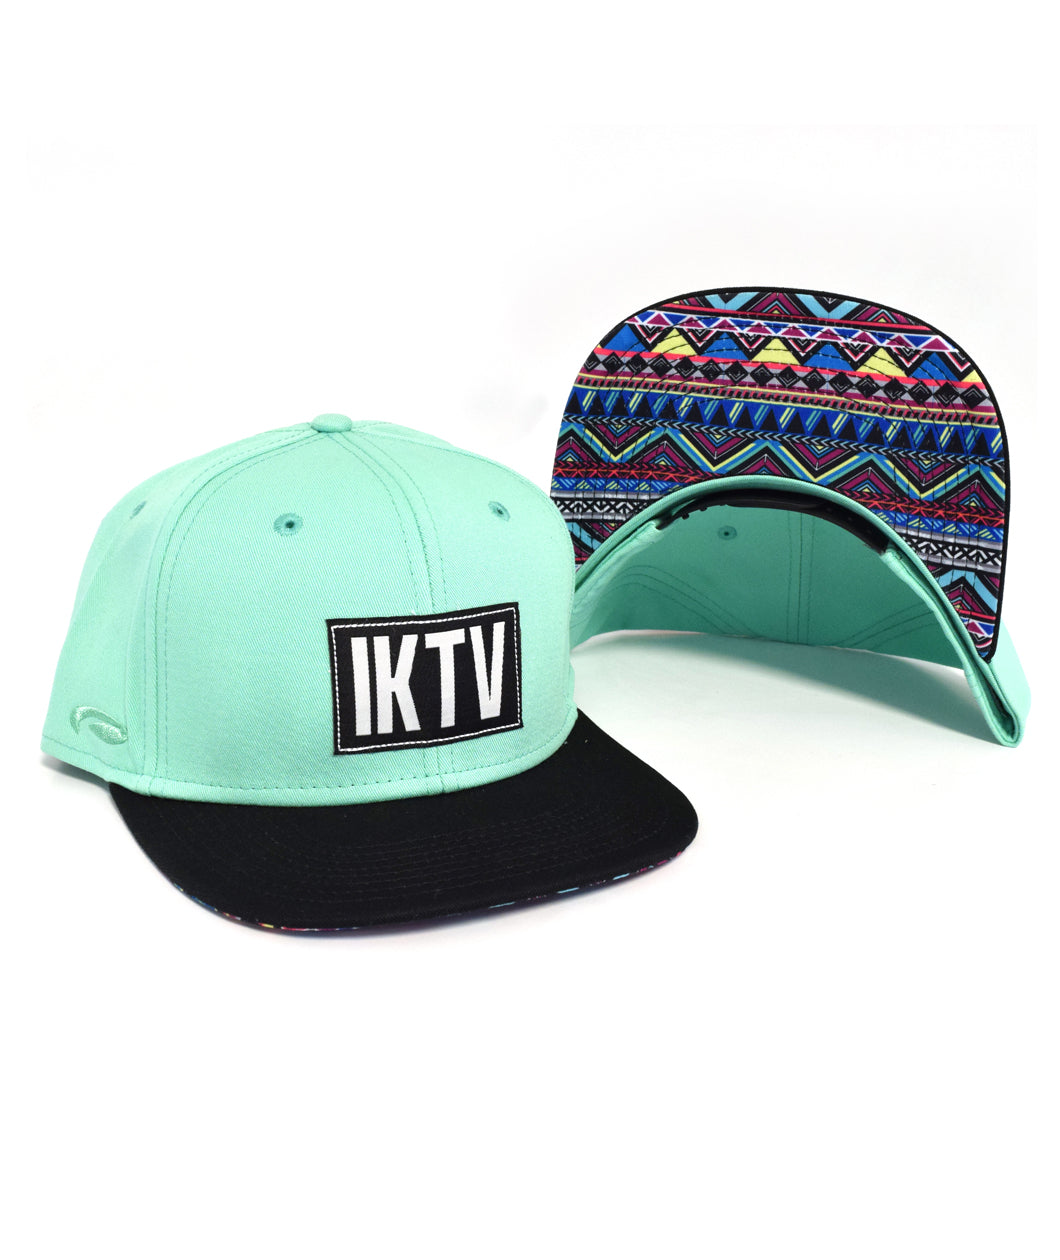 Aqua trucker hat with a black square on the front with white letters "IKTV." The bill is black on the top and has a blue, red, and yellow pattern on the bottom. By Charles Trippy